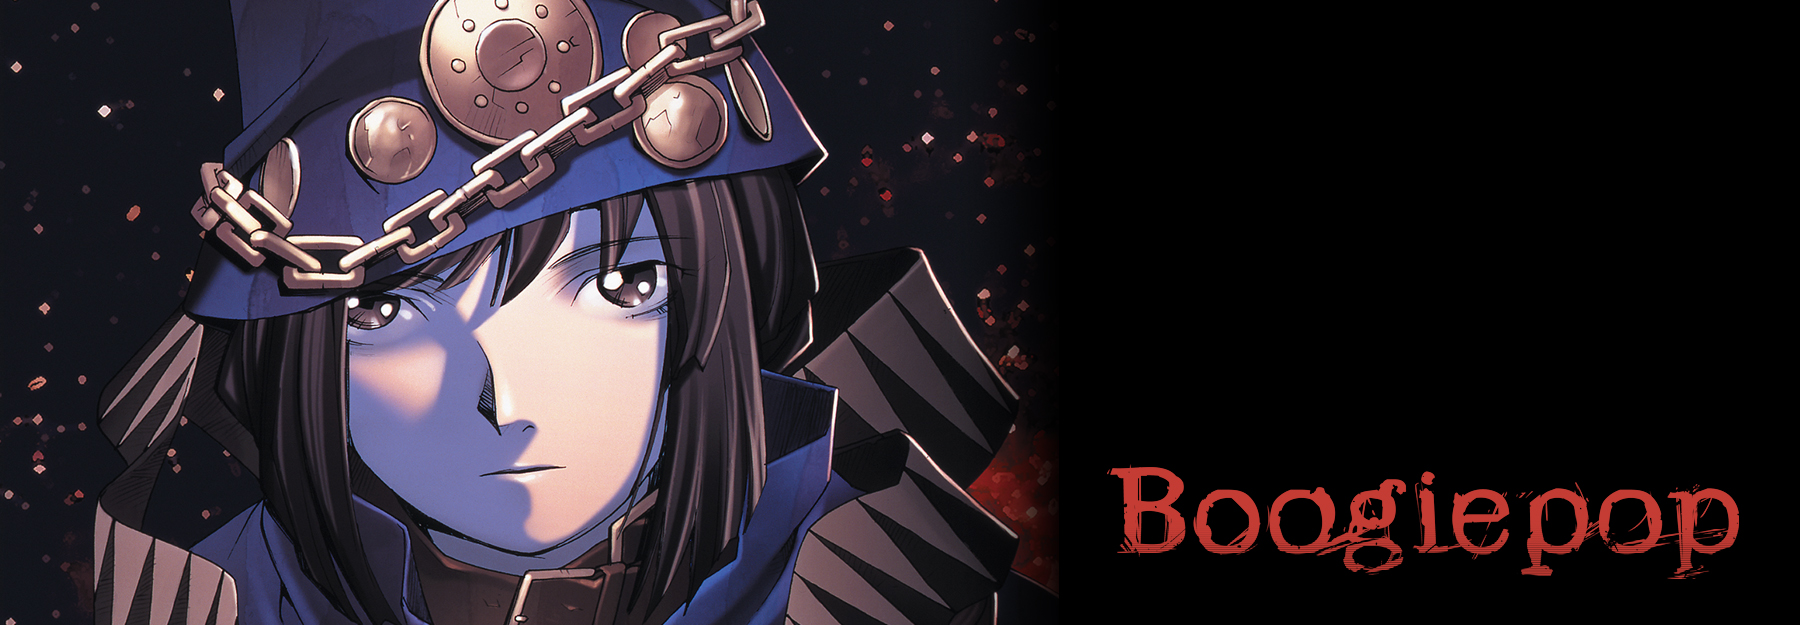 A promotional image for the Seven Seas Entertainment release of the Boogiepop series of light novels written by Kouhei Kadono and illustrated by Kouji Ogata featuring the titular specter, Boogiepop.